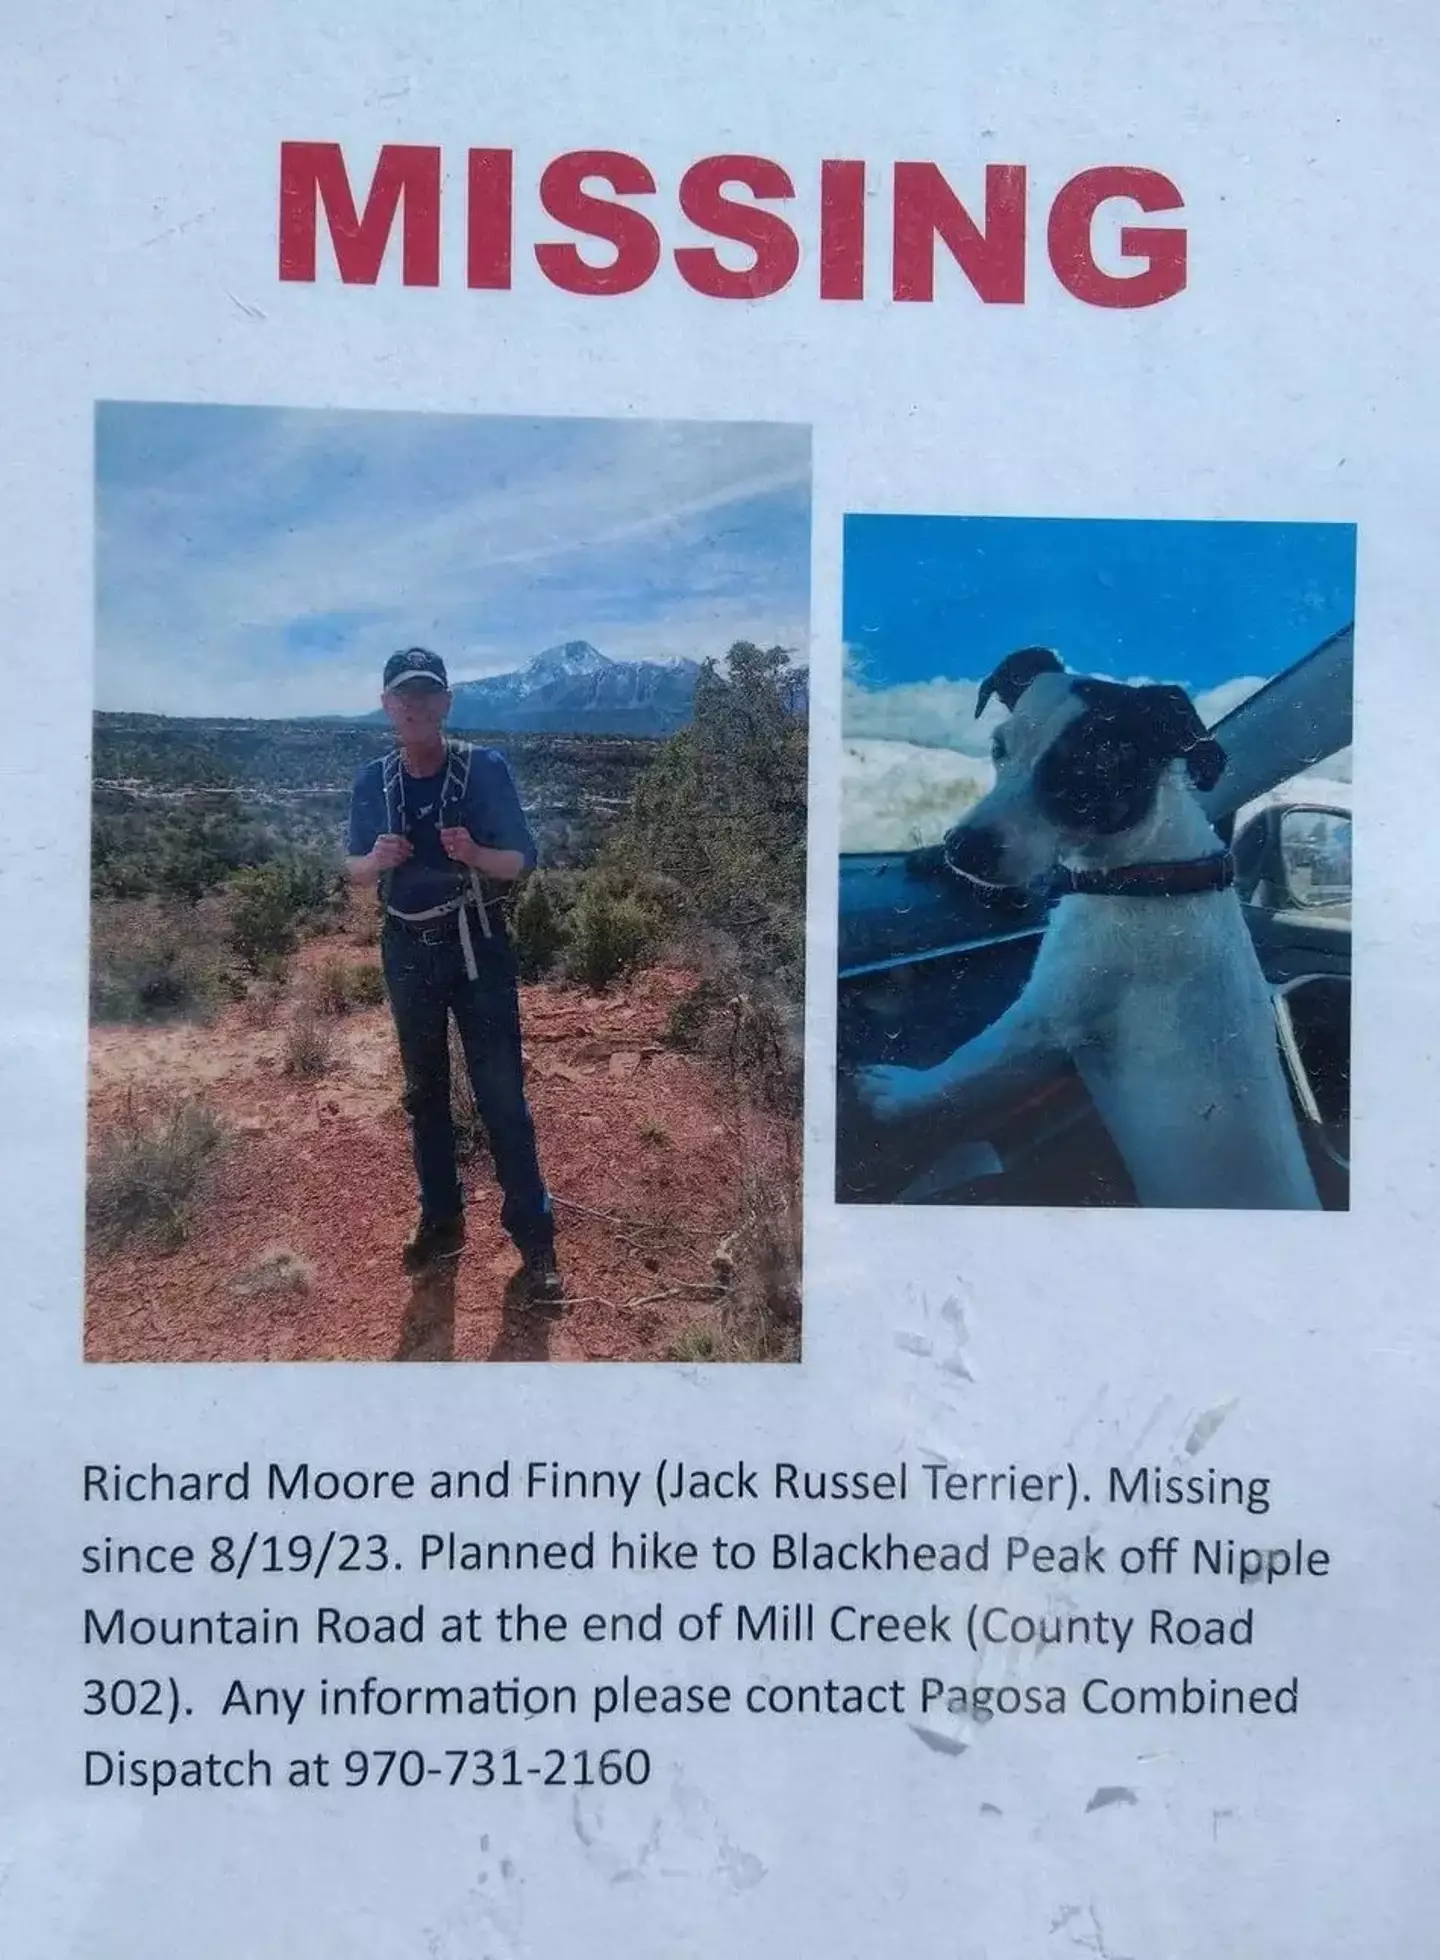 The pair went missing on 19 August.